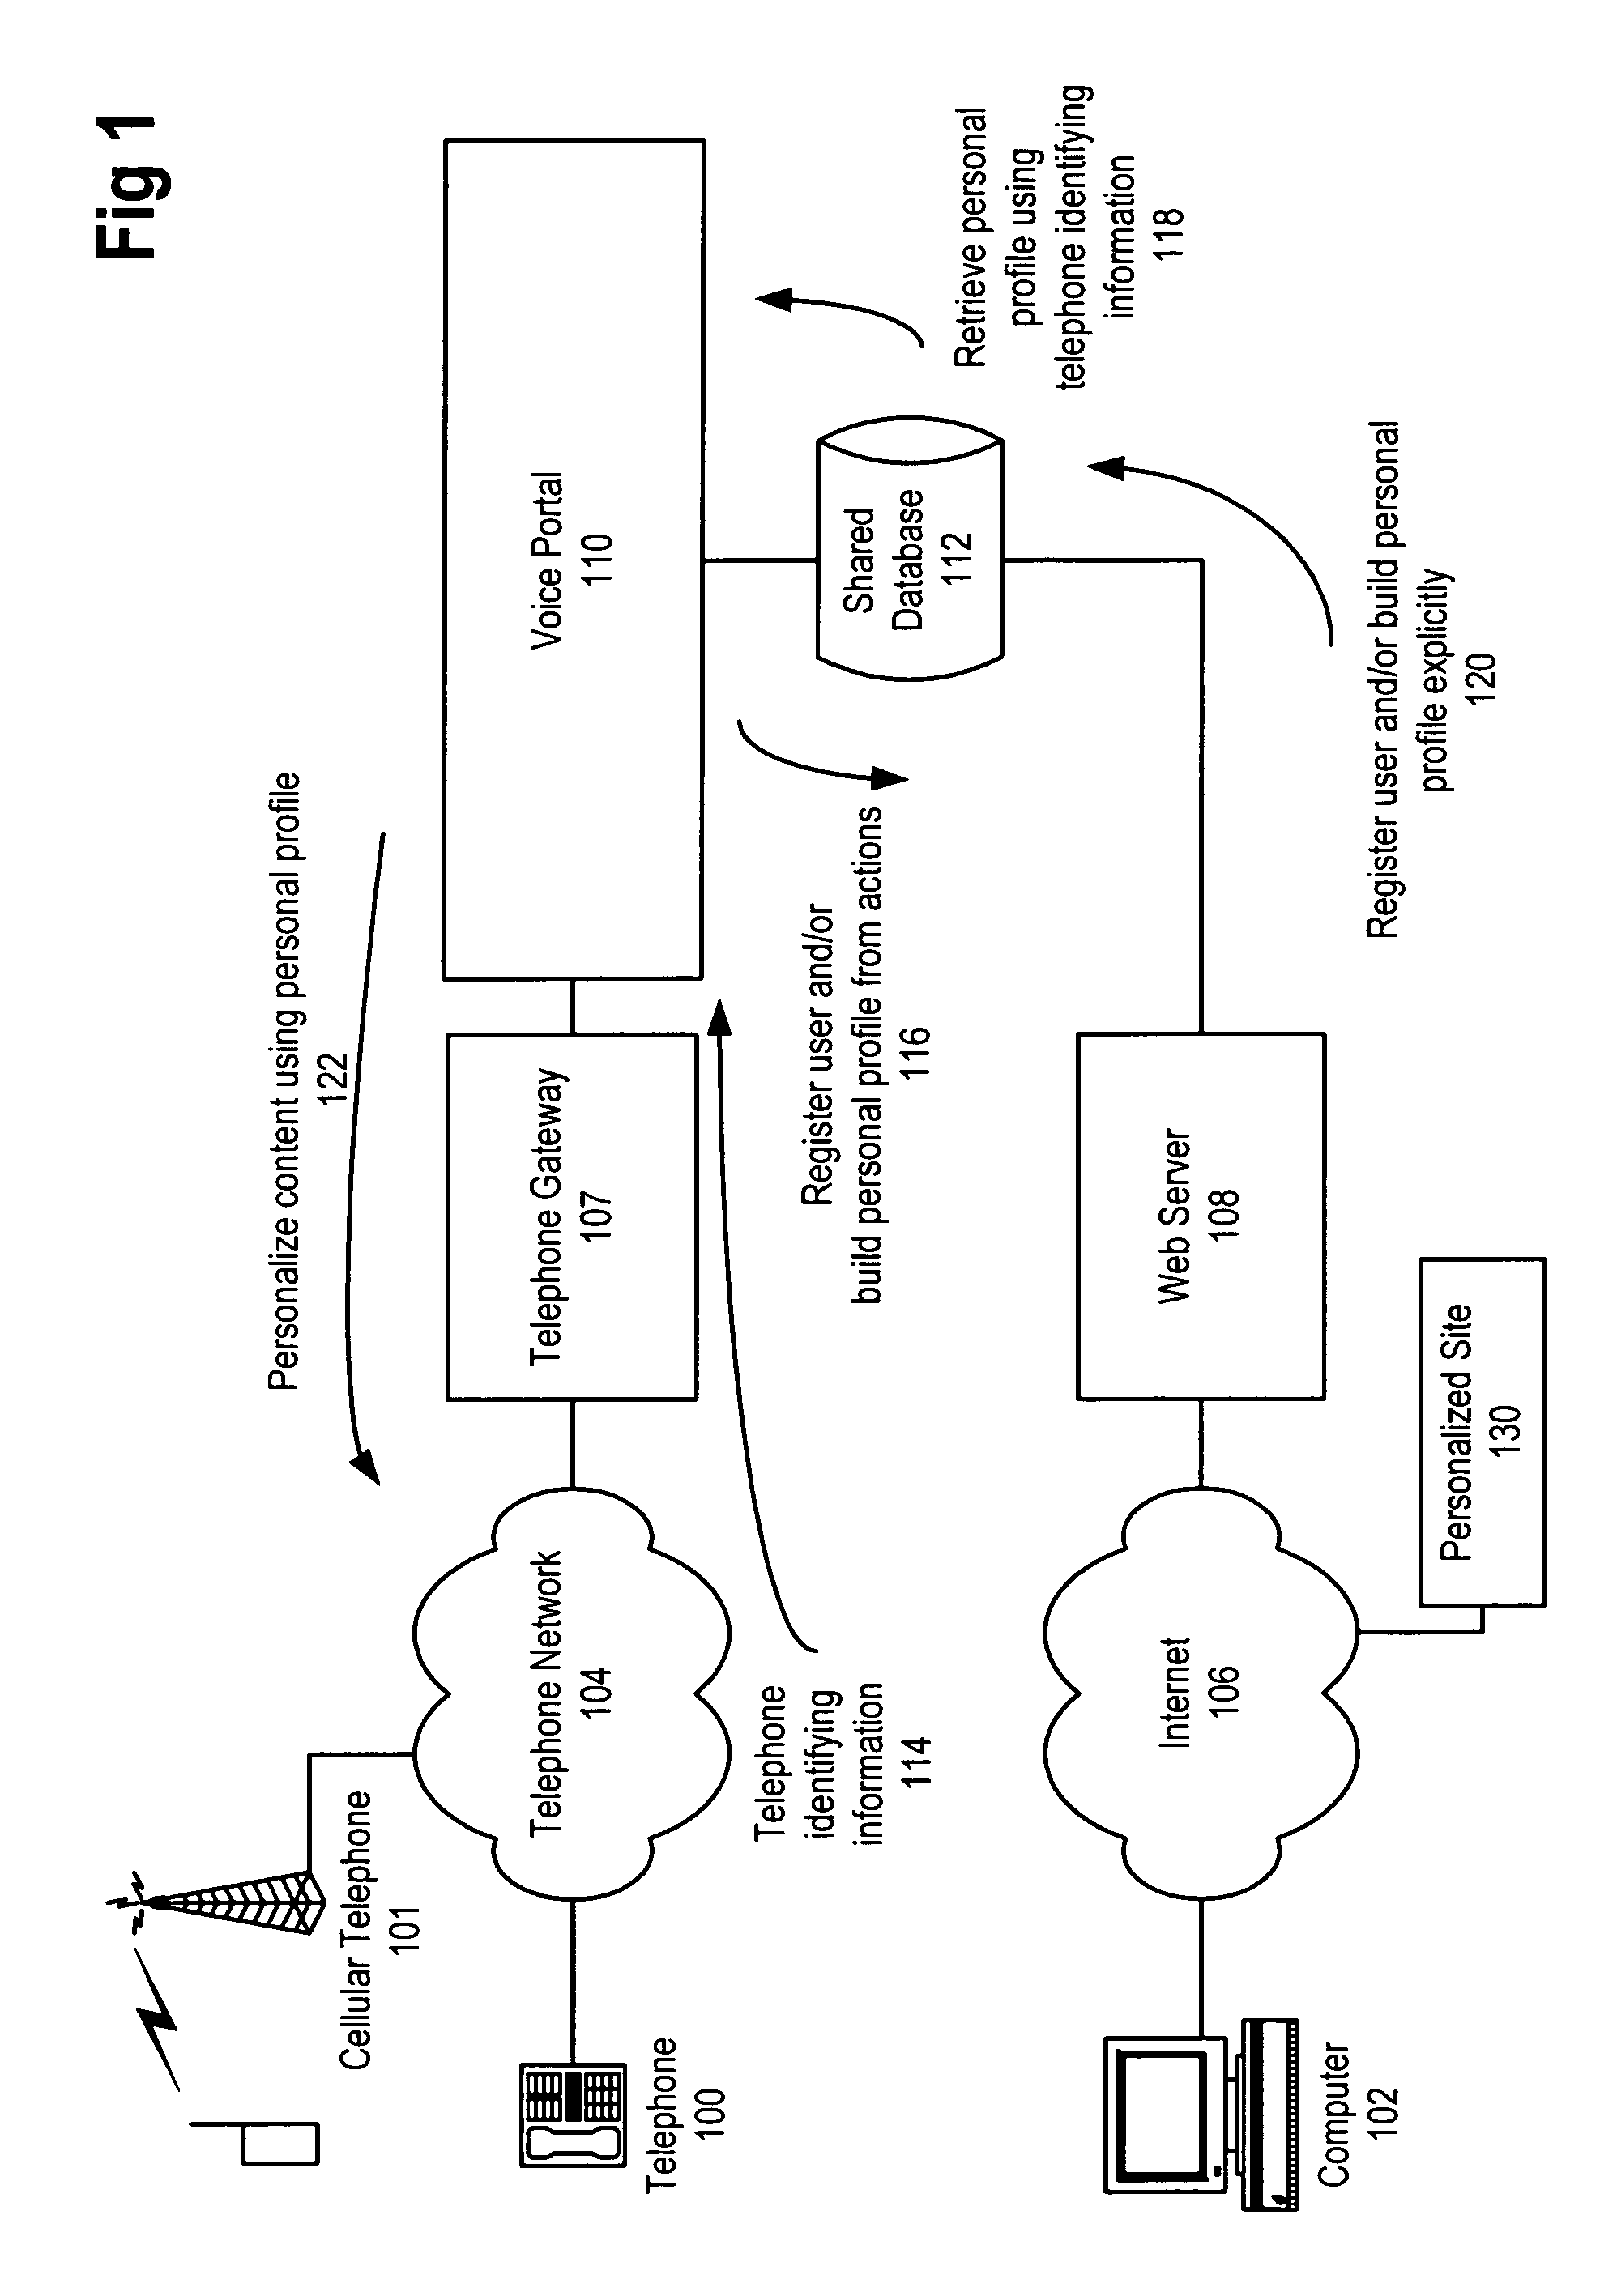 Phone application state management mechanism